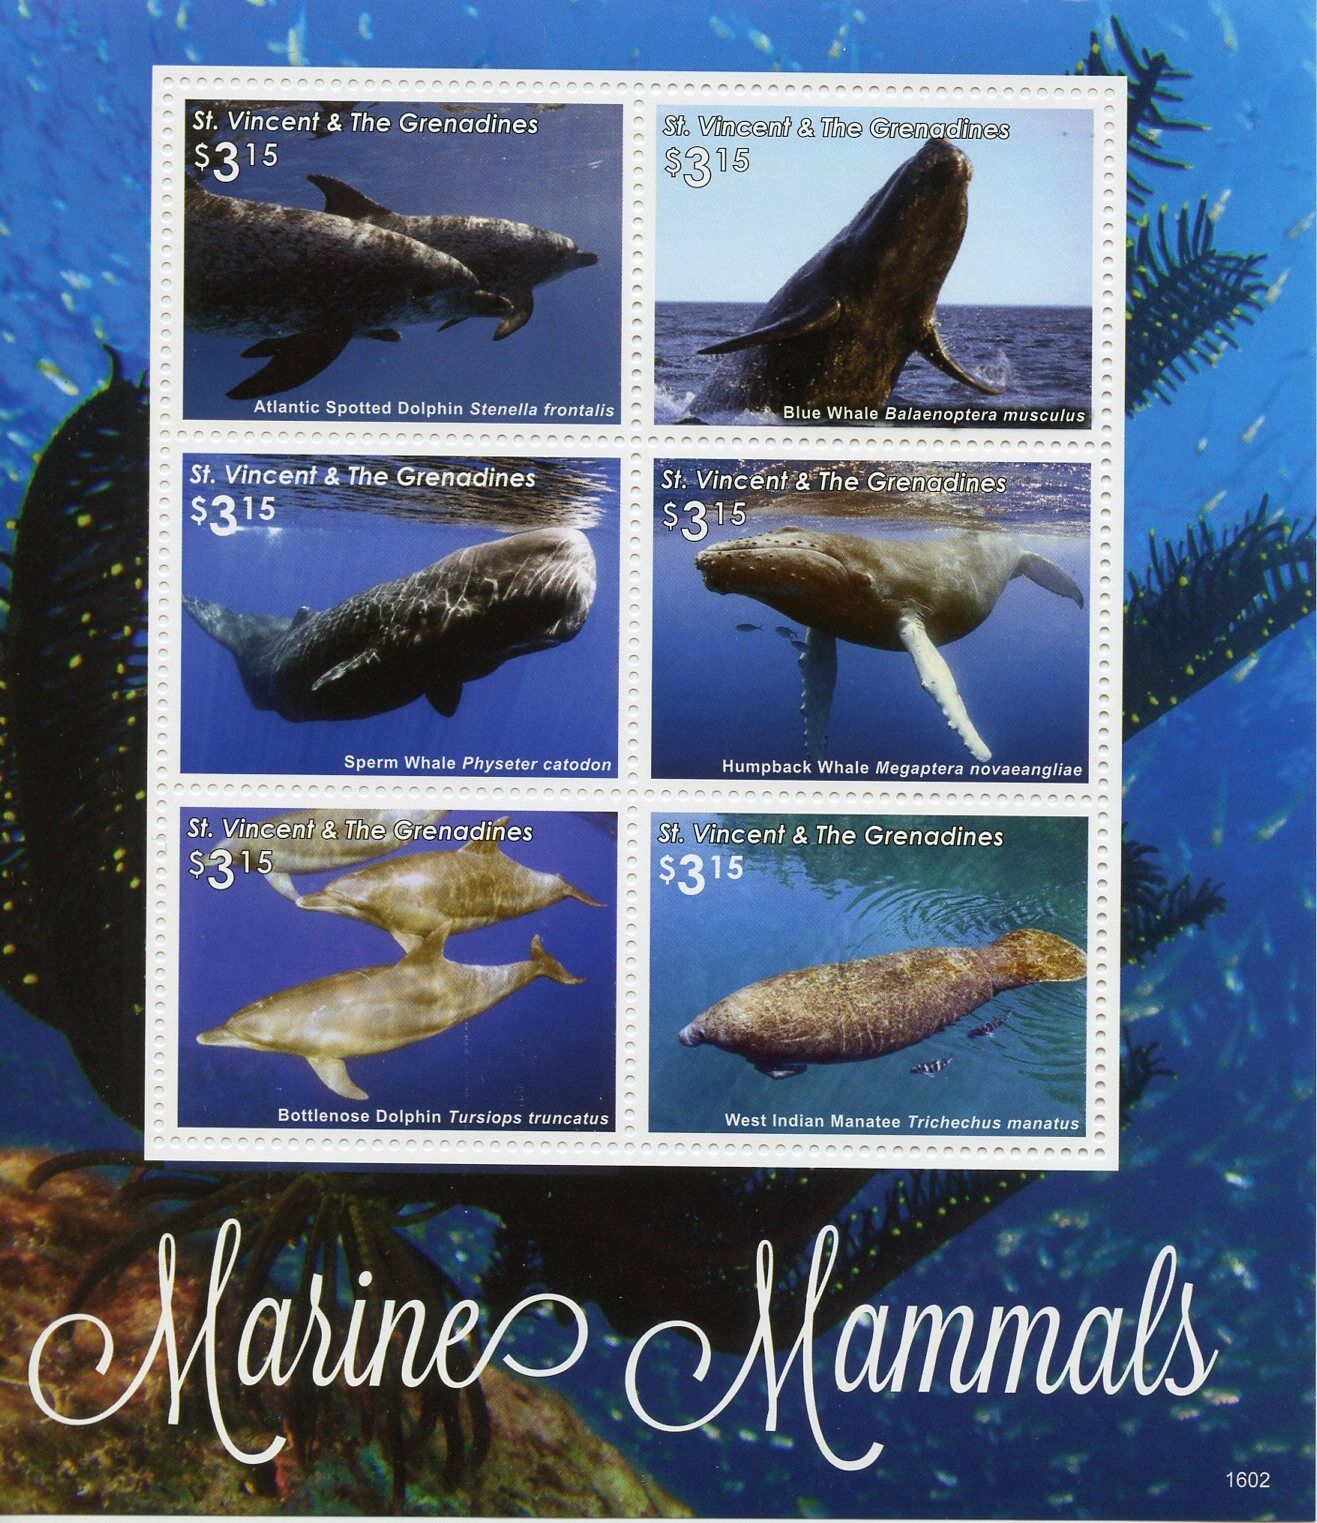 St Vincent & The Grenadines 2016 MNH Marine Mammals 6v M/S II Whales Dolphins